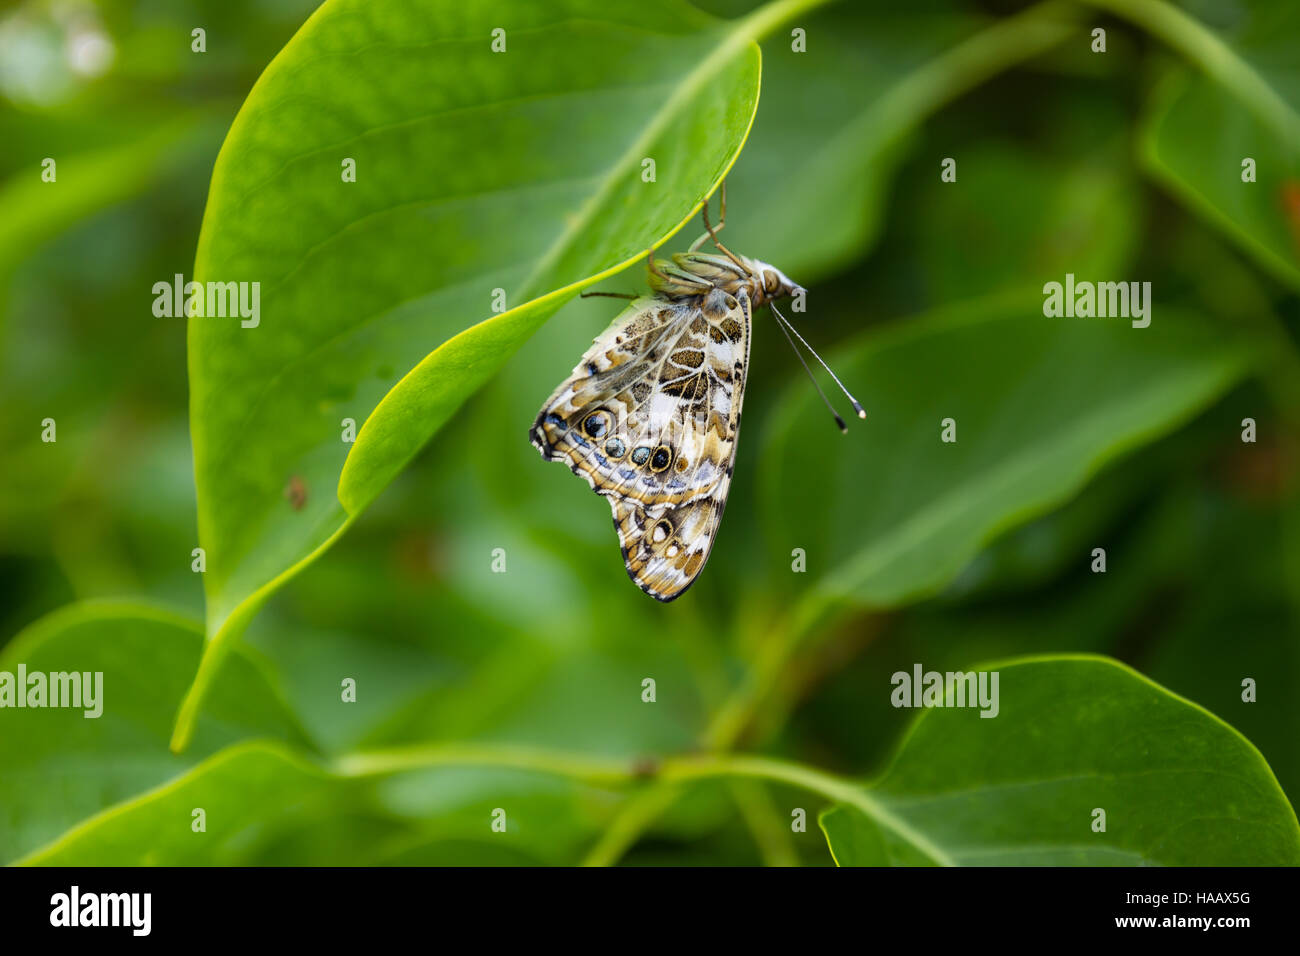 A newborn Painted Lady butterfly sitting on a leaf Stock Photo